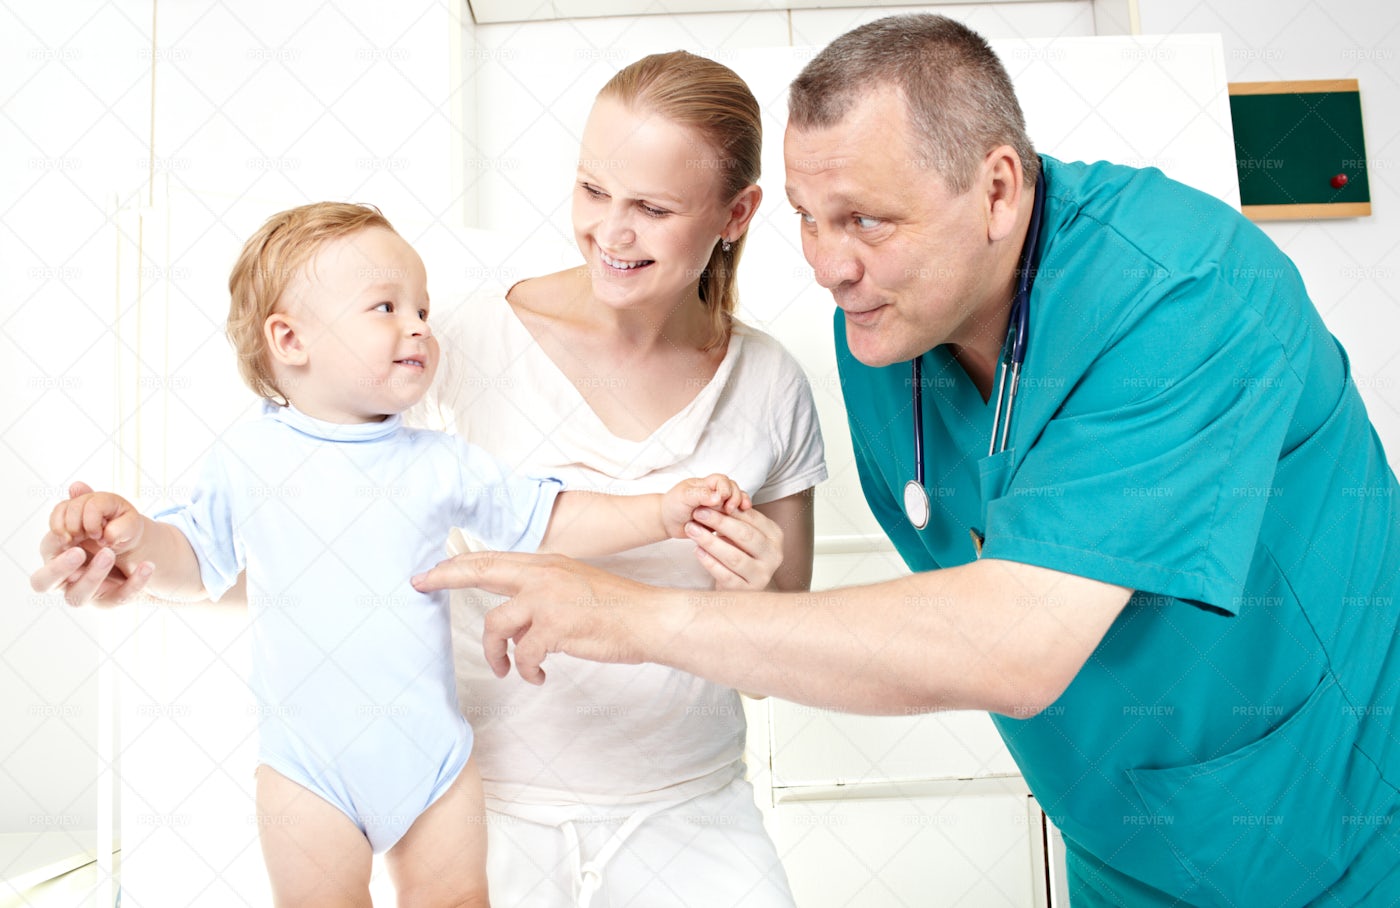 Happy Baby At The Doctor: Stock Photos